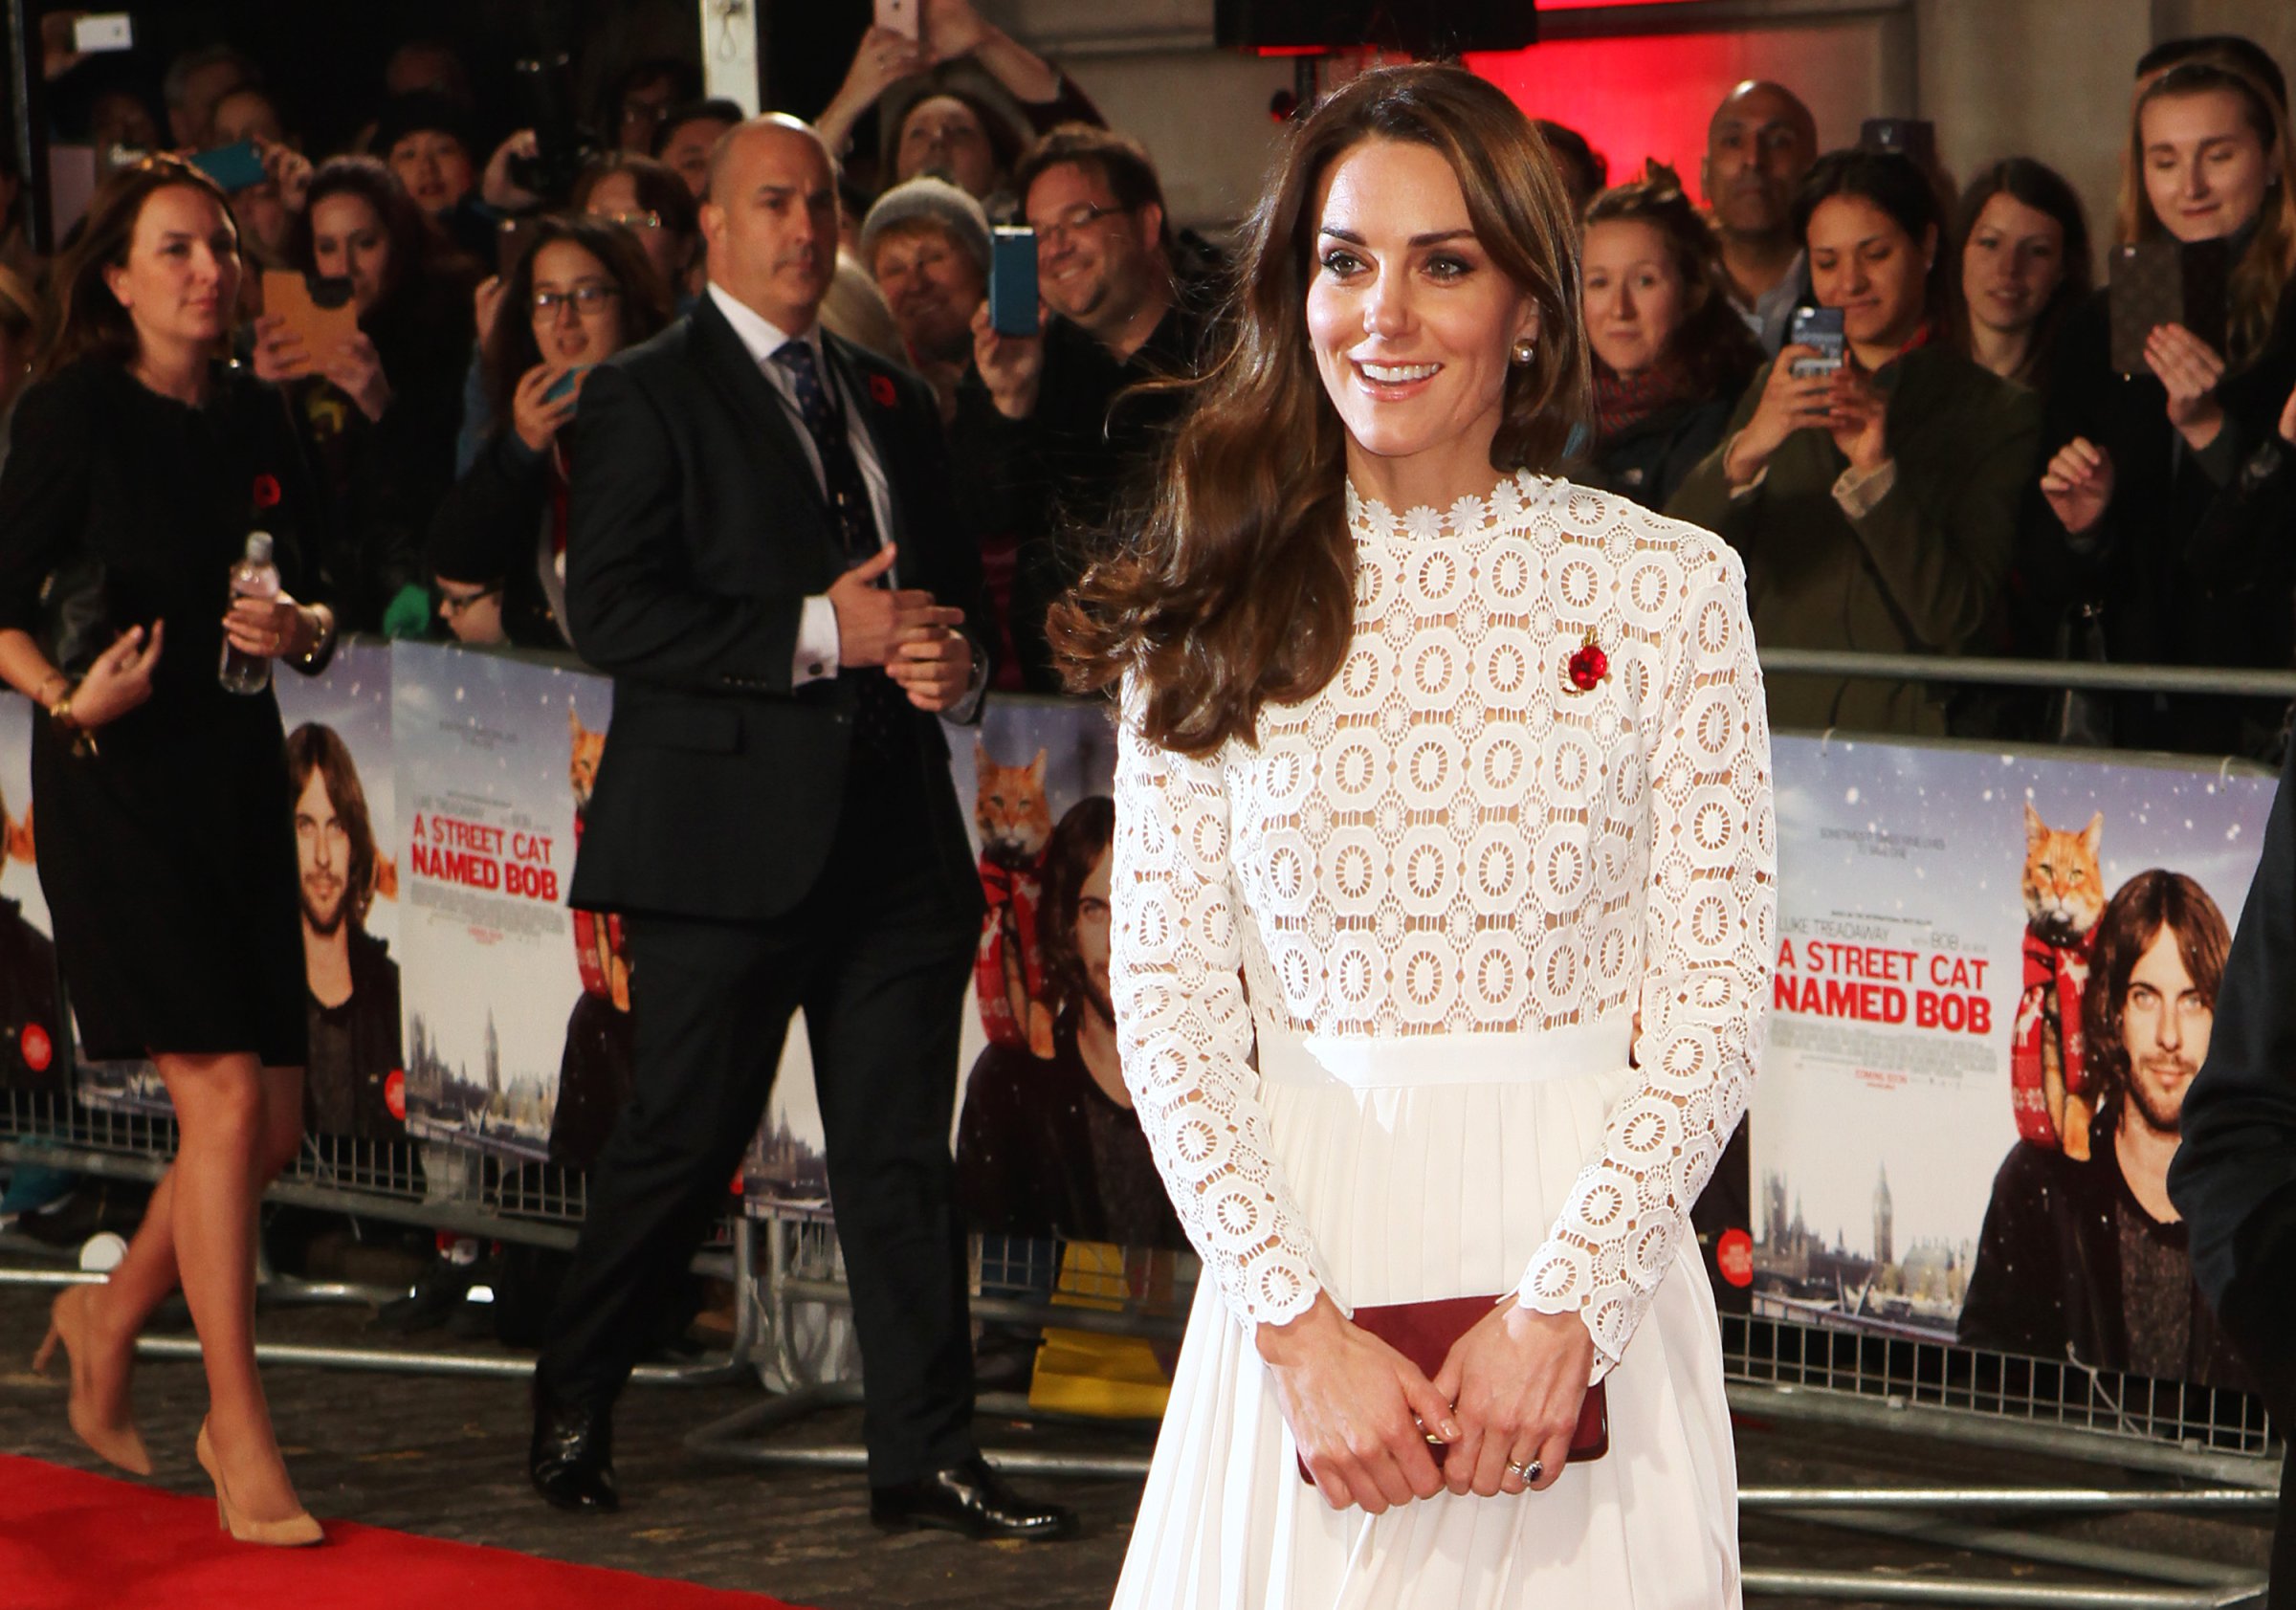 The Duchess Of Cambridge Attends UK Premiere Of "A Street Cat Named Bob" In Aid Of Action On Addiction - VIP Arrivals